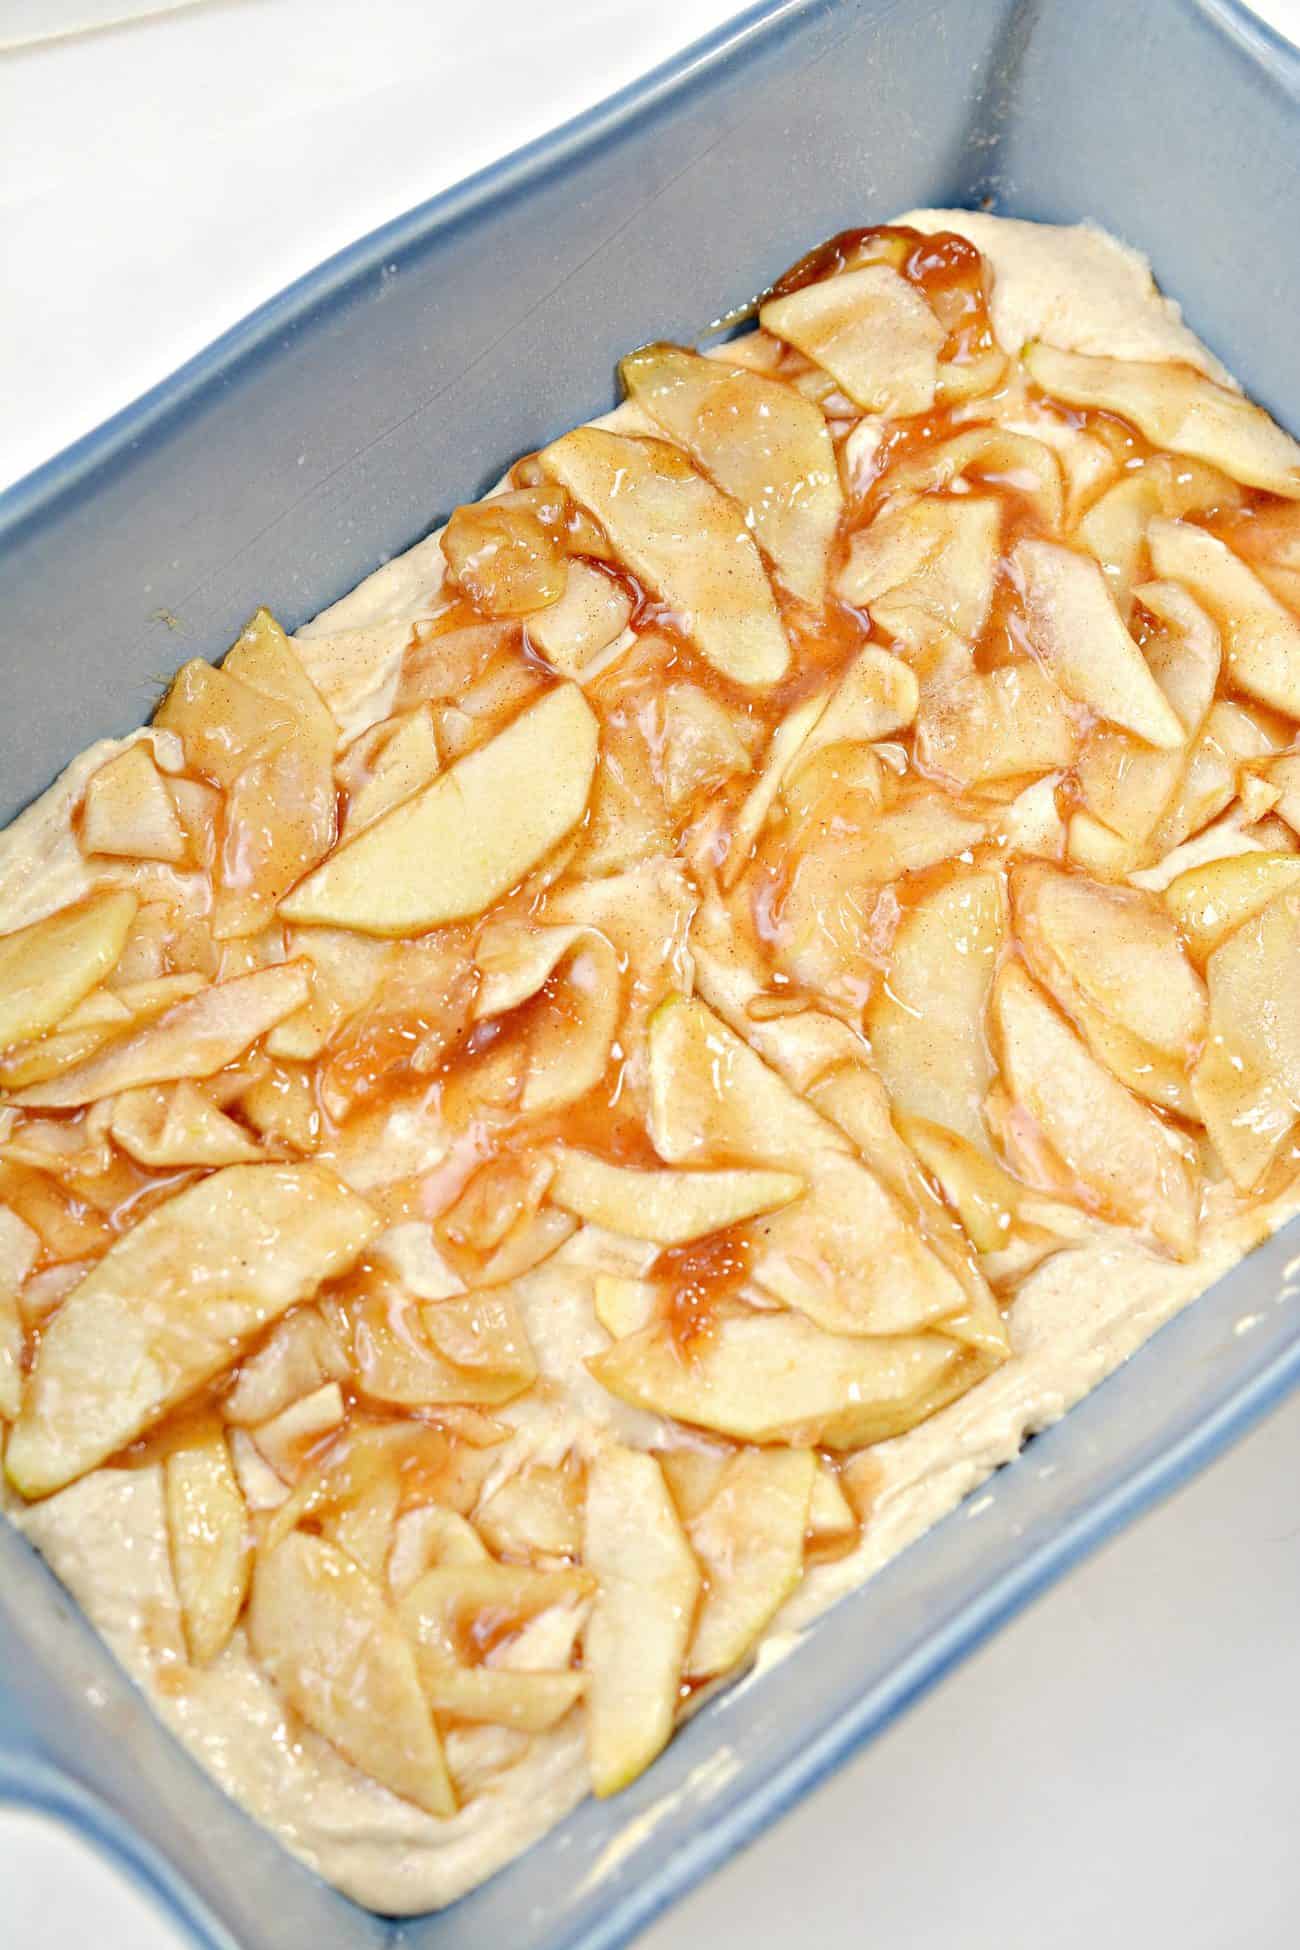 Cover the batter with the apple filling, and sprinkle ¾ of the brown sugar mixture on top of them.